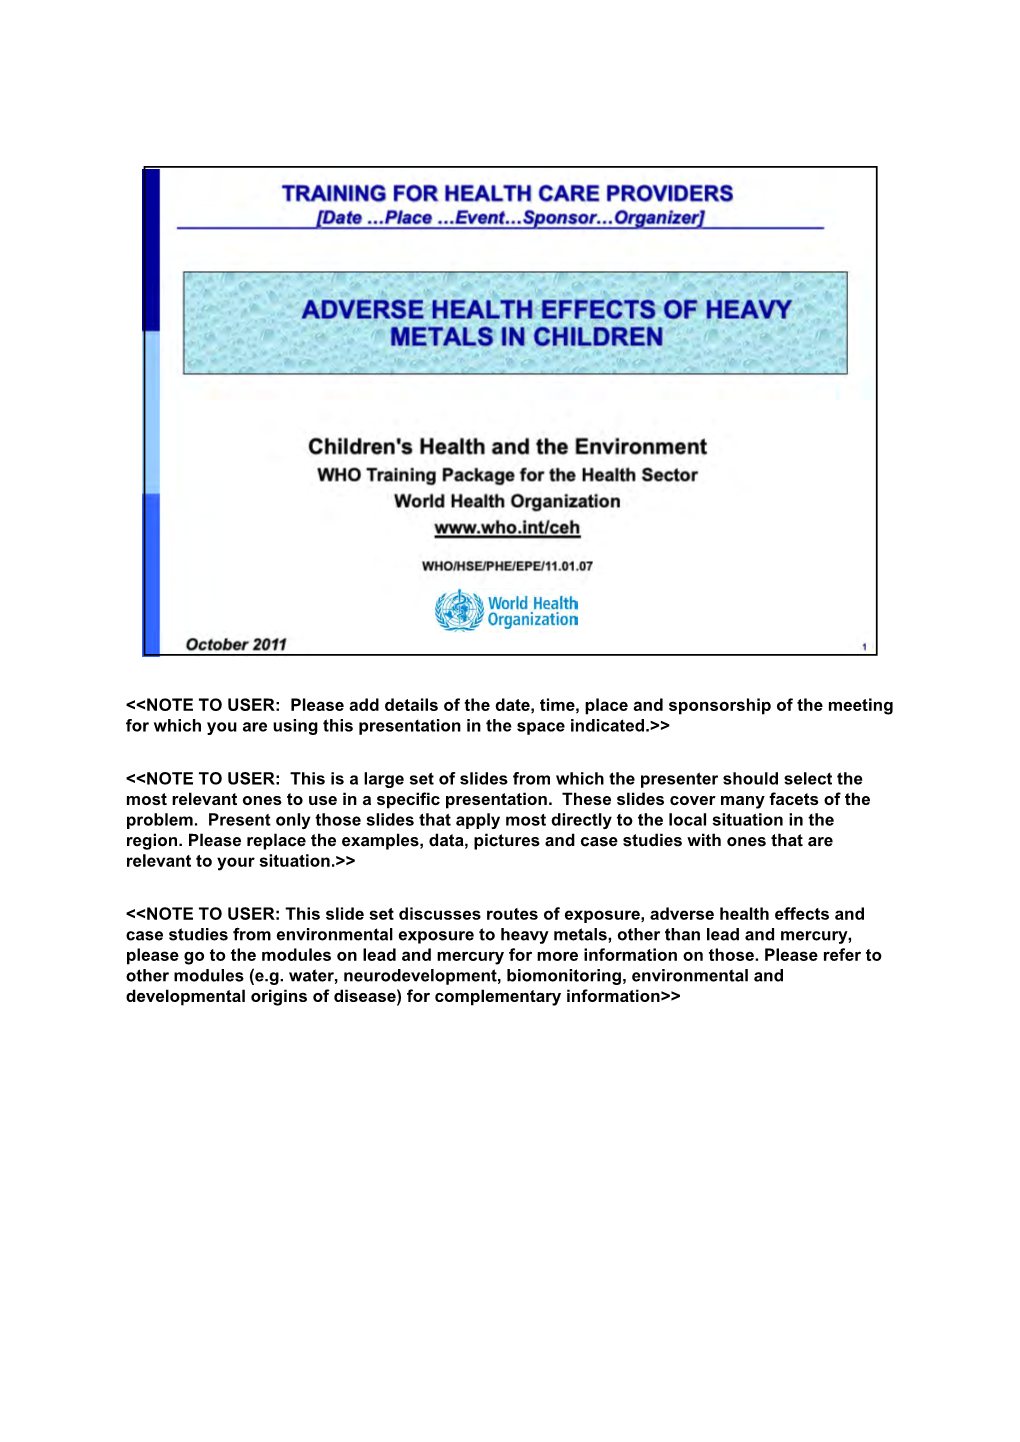 Children and Other Heavy Metals Rev May2020